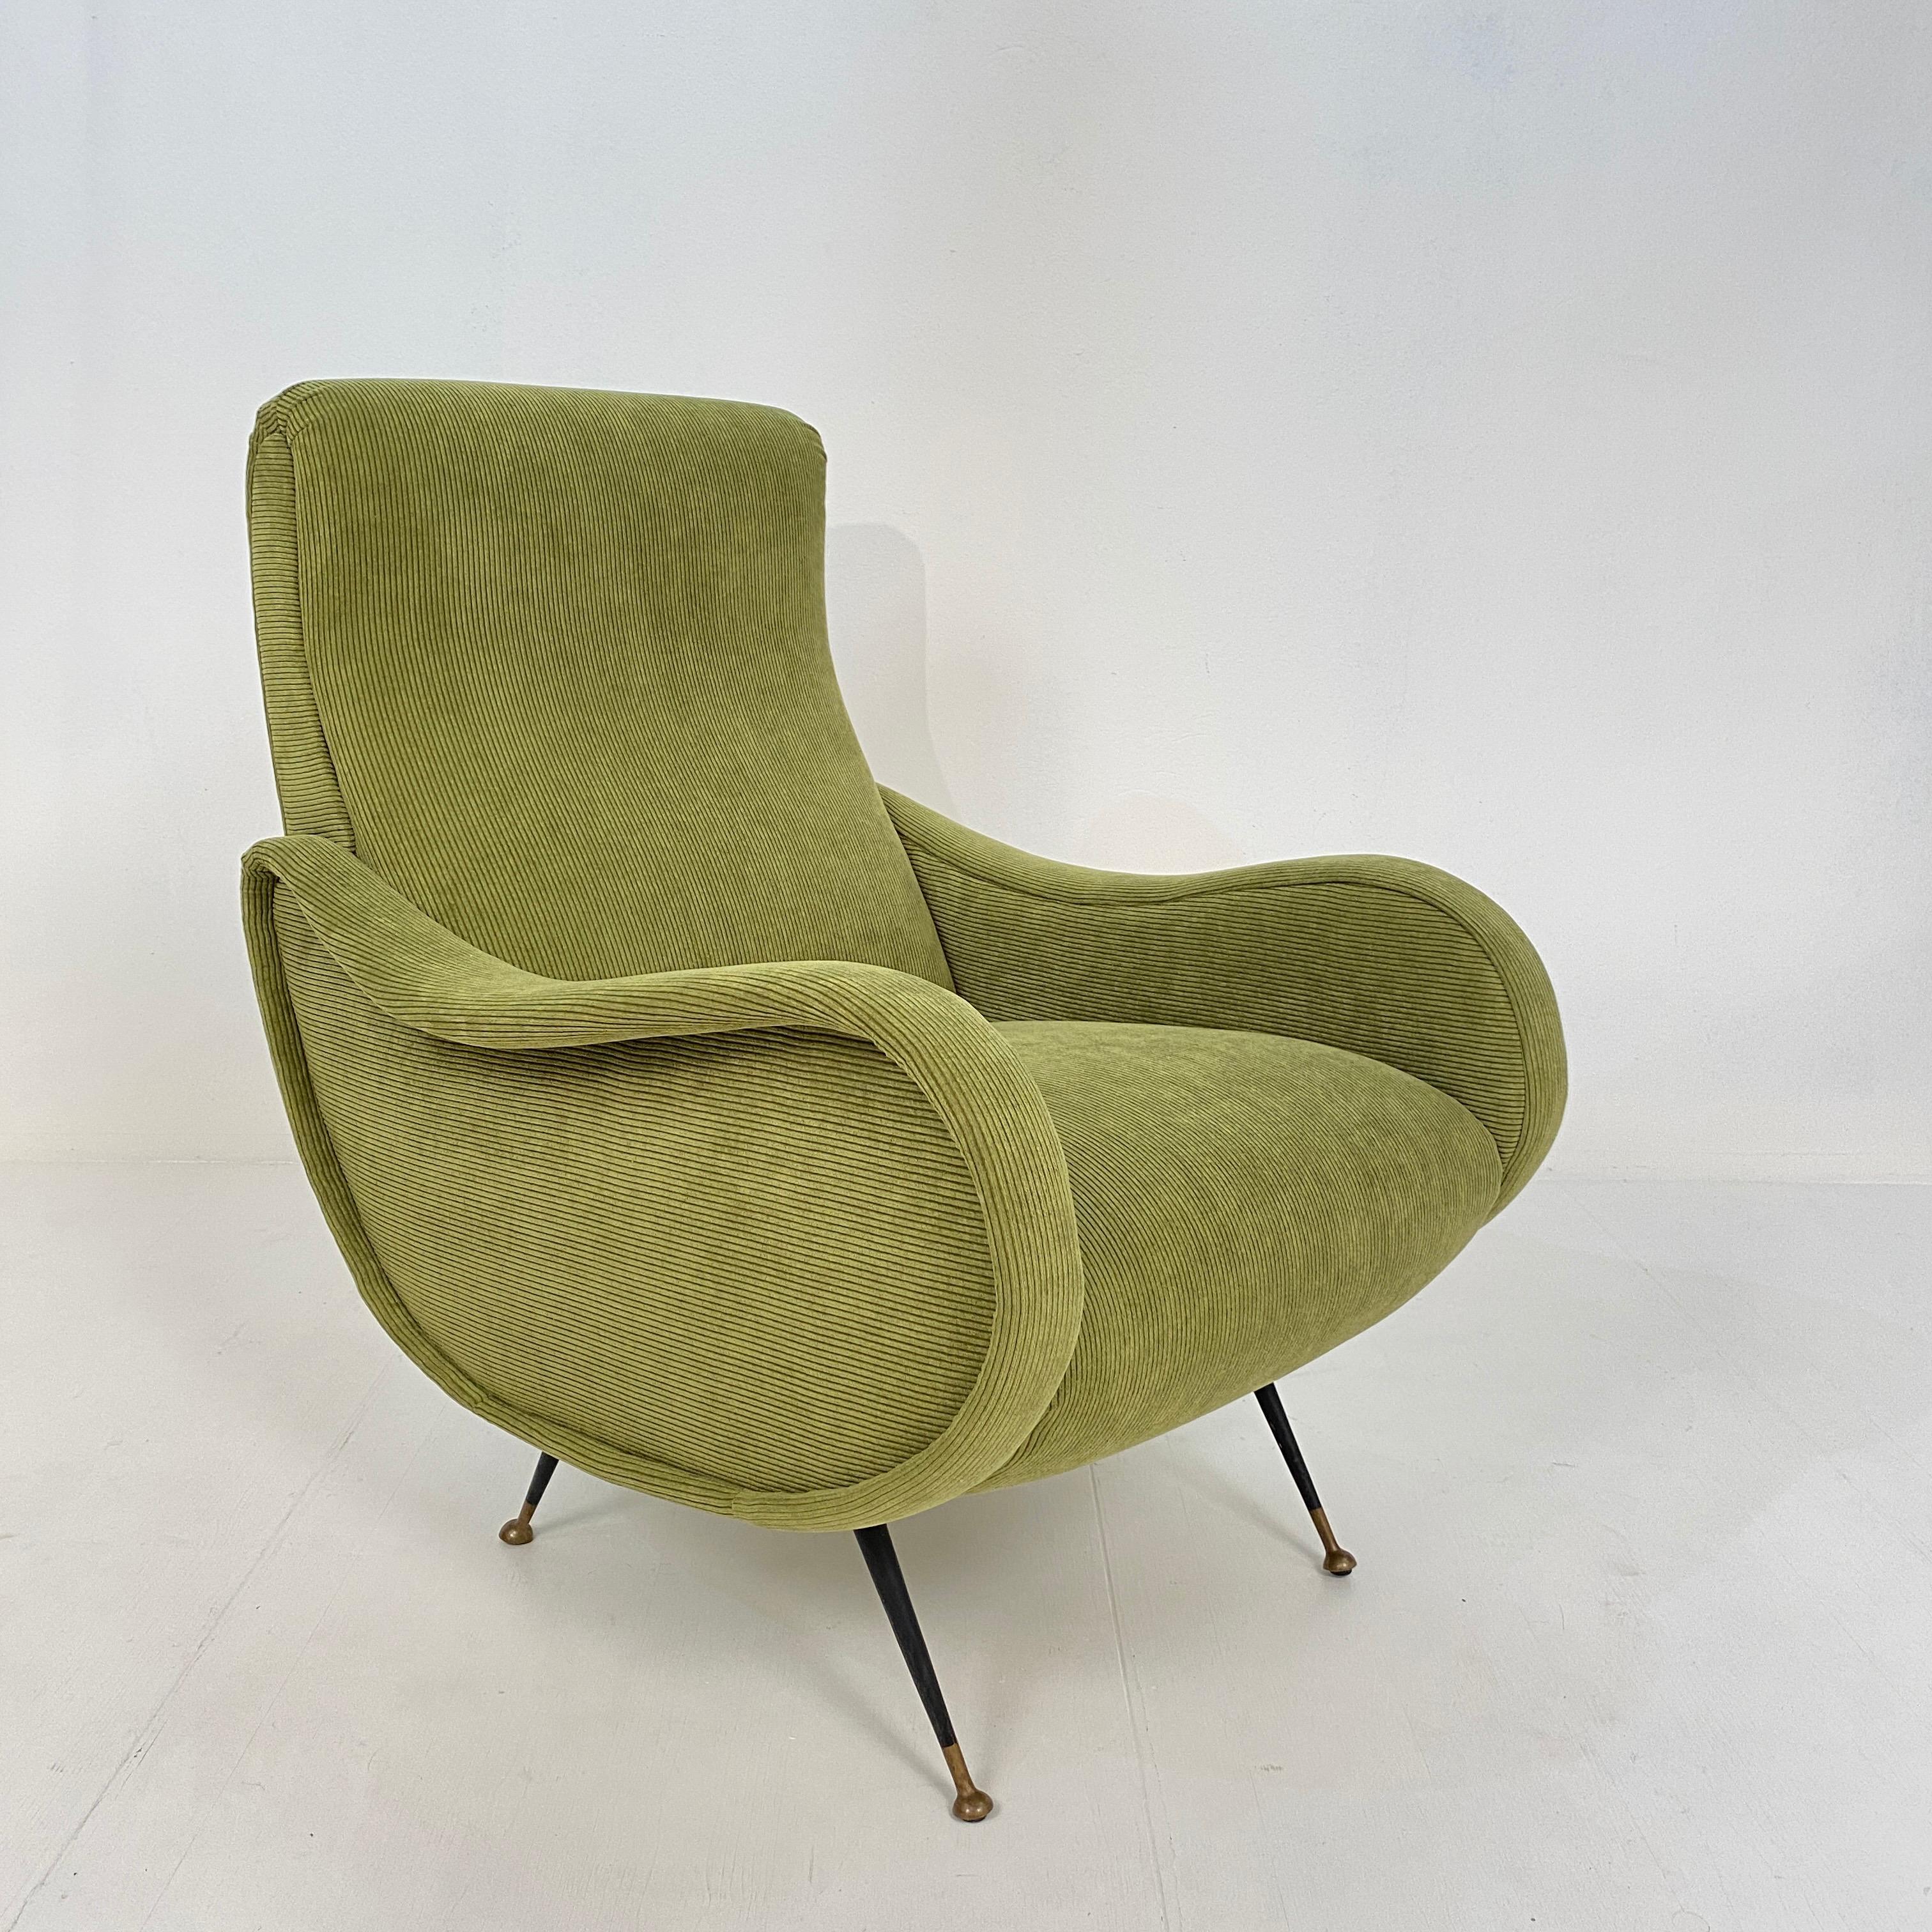 This midcentury armchair in the style of Marco Zanuso was made in the 1950s.
It is beautiful re-upholstered in a light green cord fabric with very great details.
It has got some very nice tapered metal legs with brass endings
A unique piece which